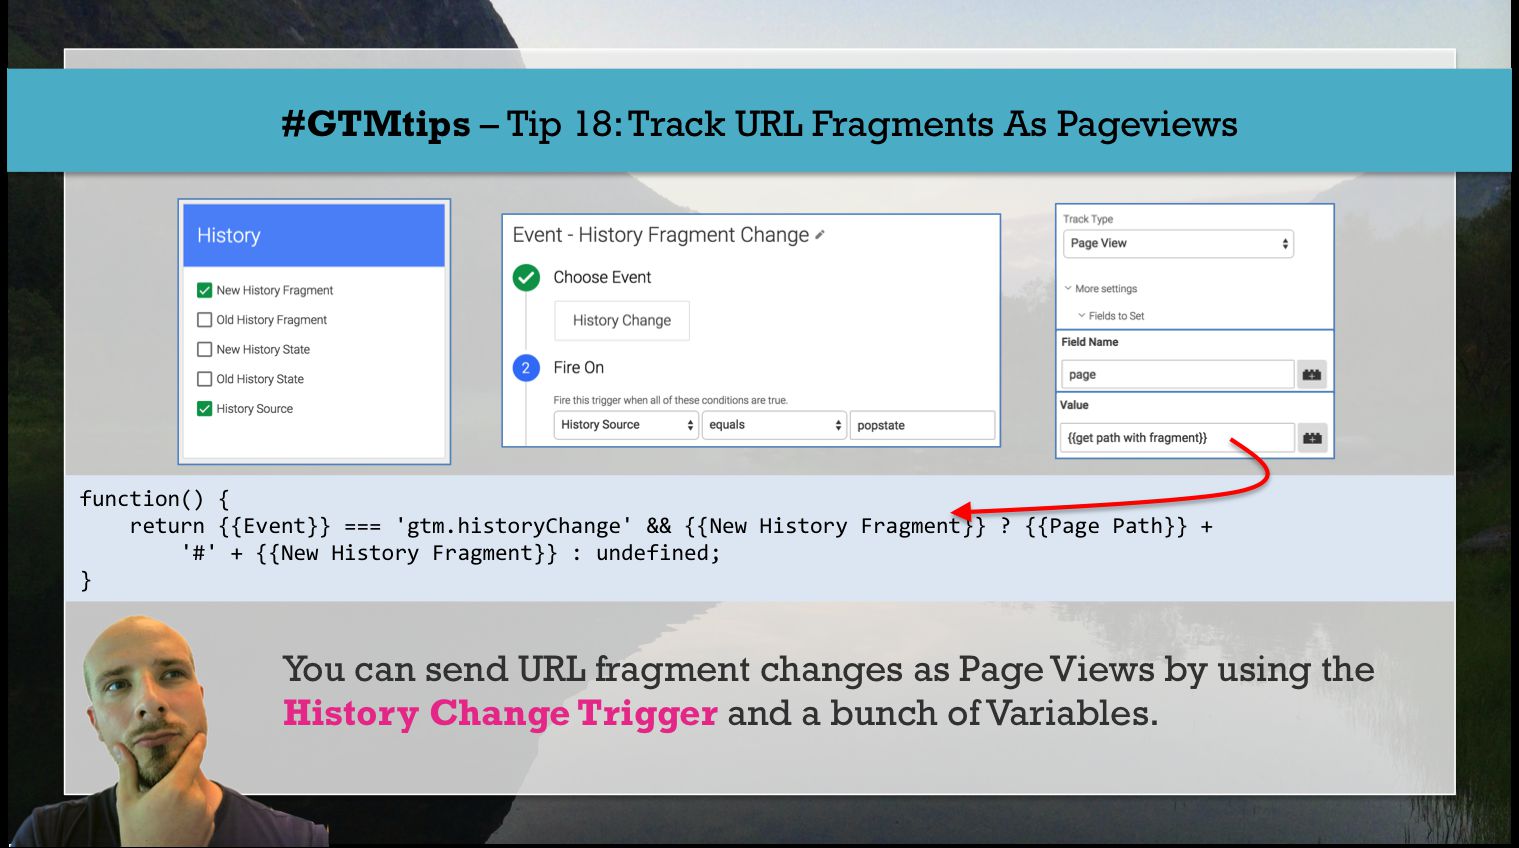 Track URL Fragments As Page Views